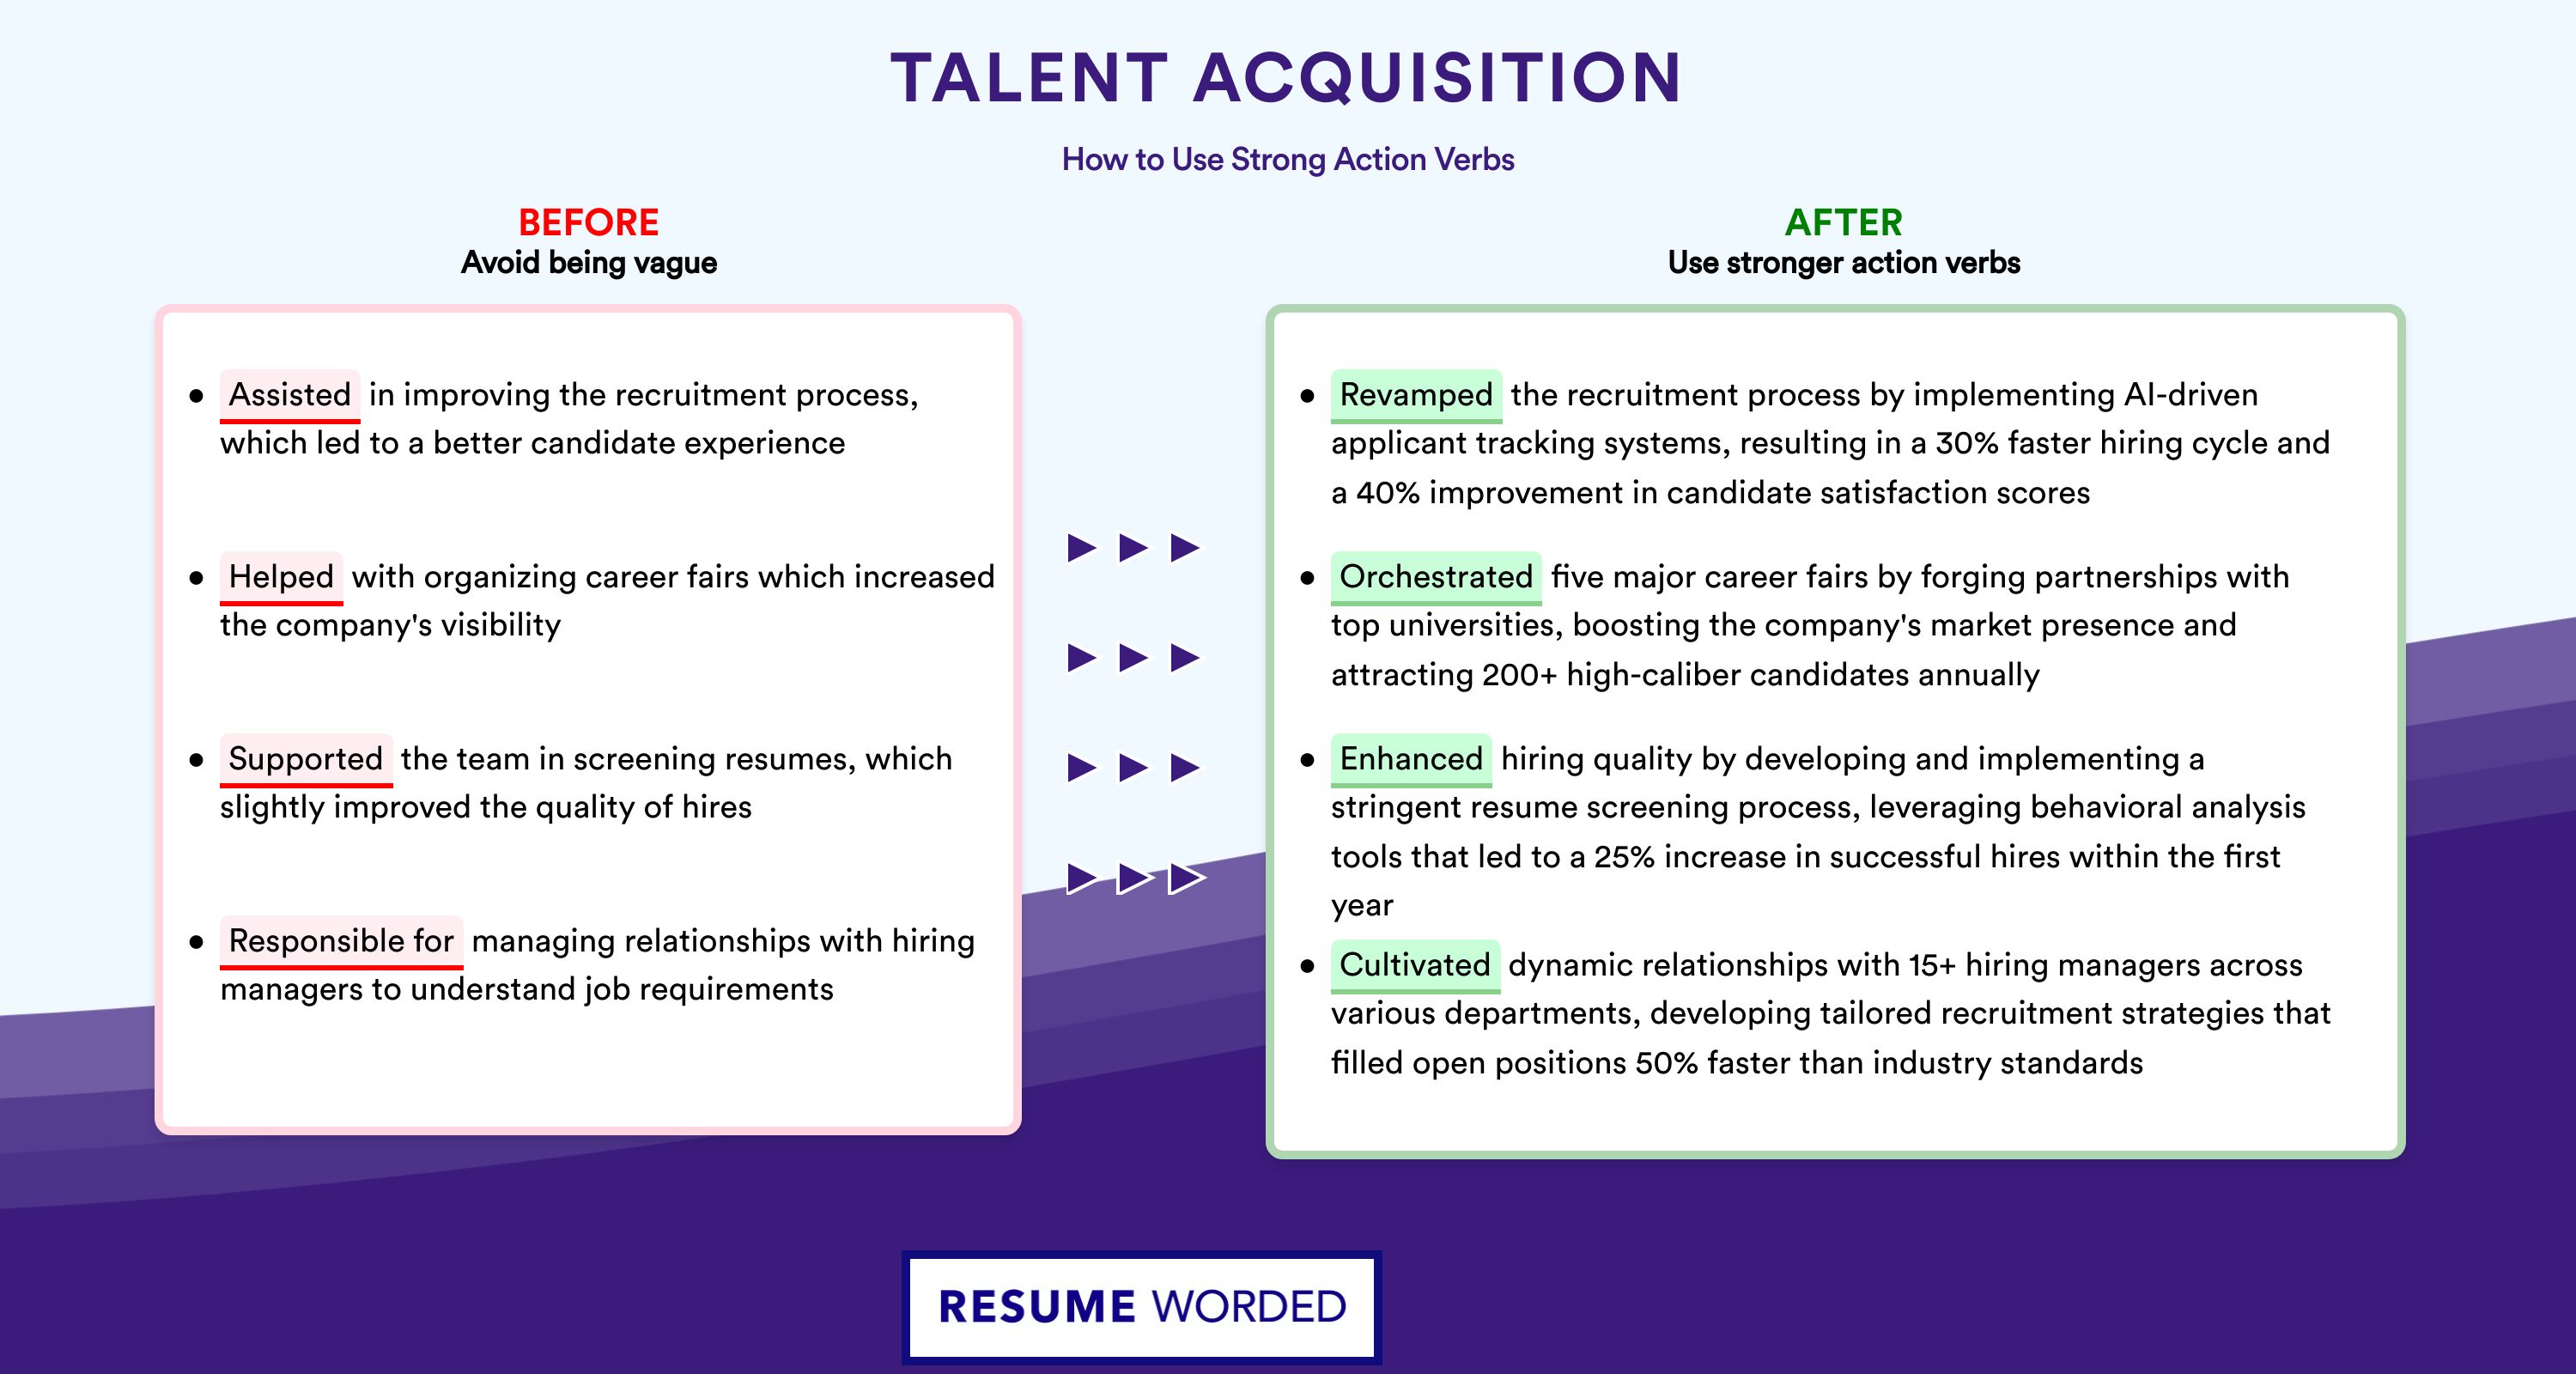 Action Verbs for Talent Acquisition